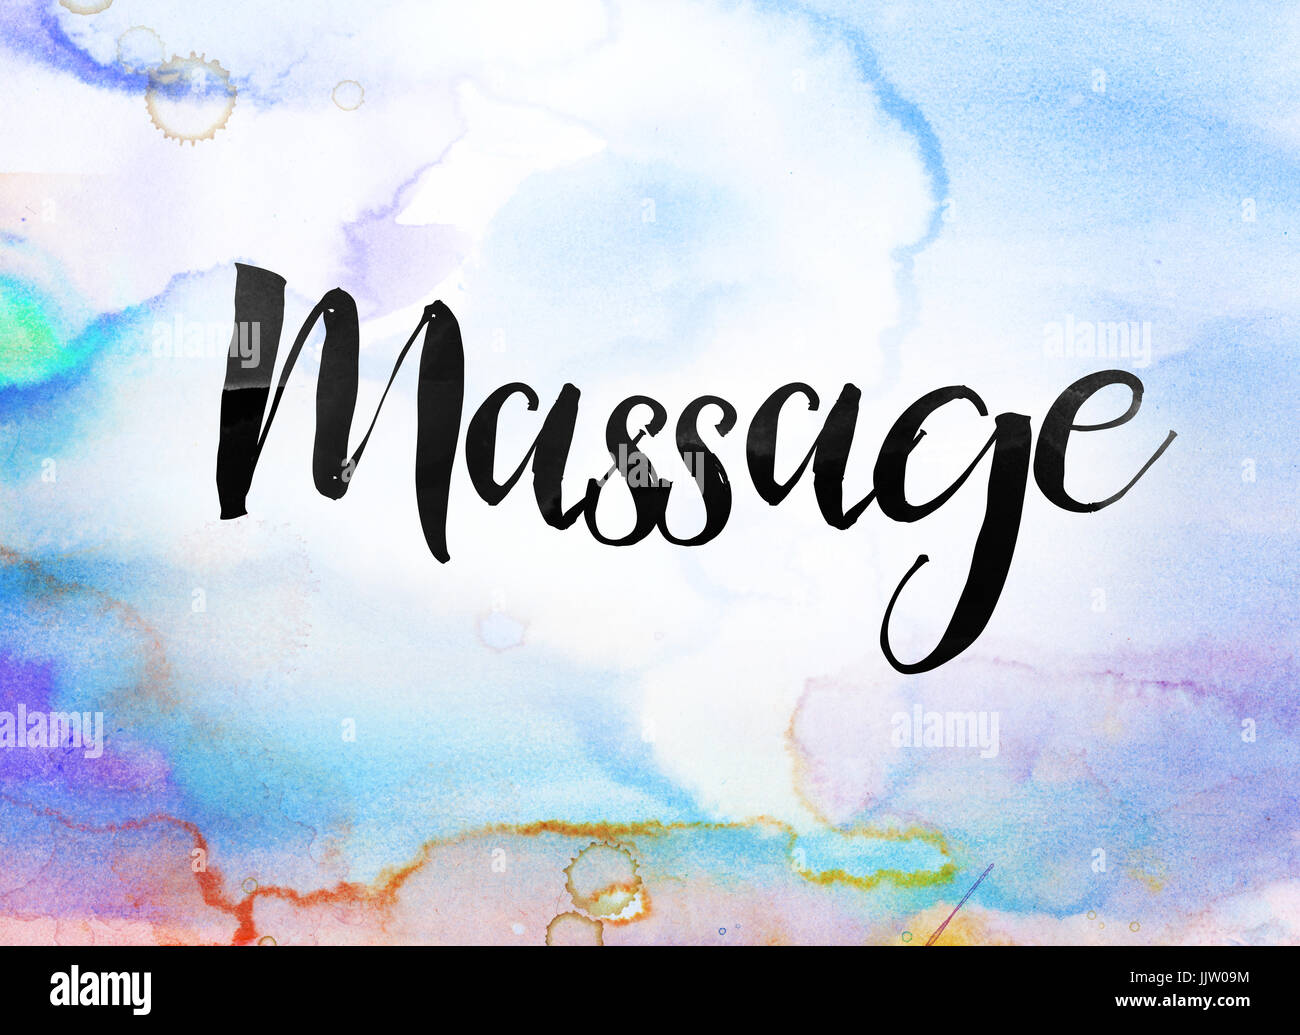 The Word Massage Concept And Theme Written In Black Ink On A